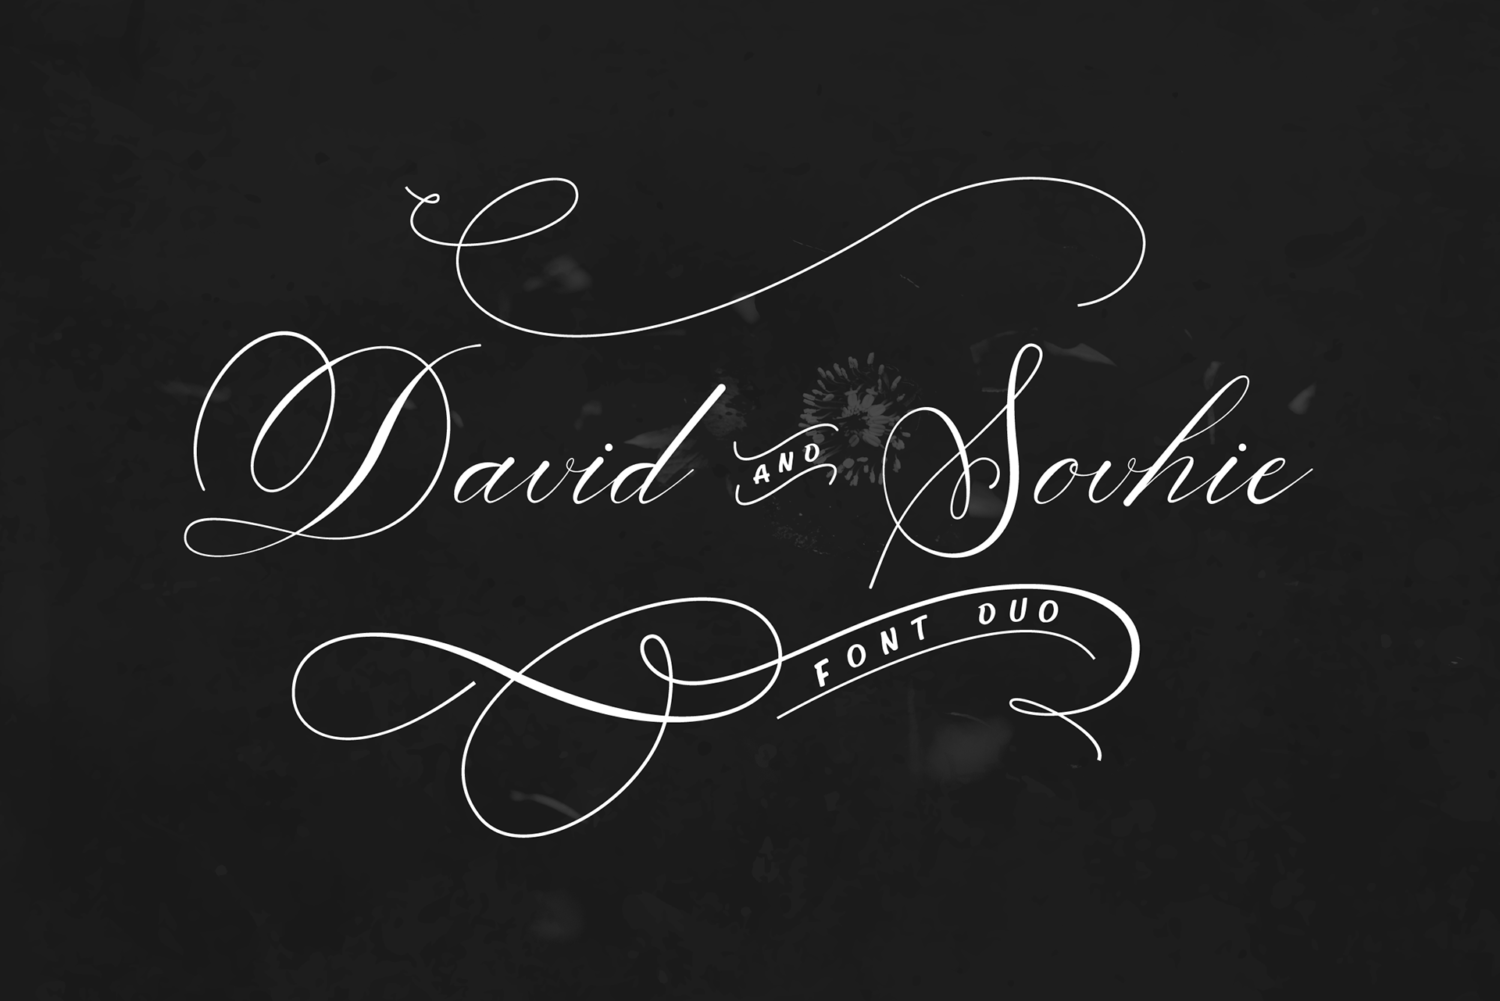 David and Sovhie Free Font